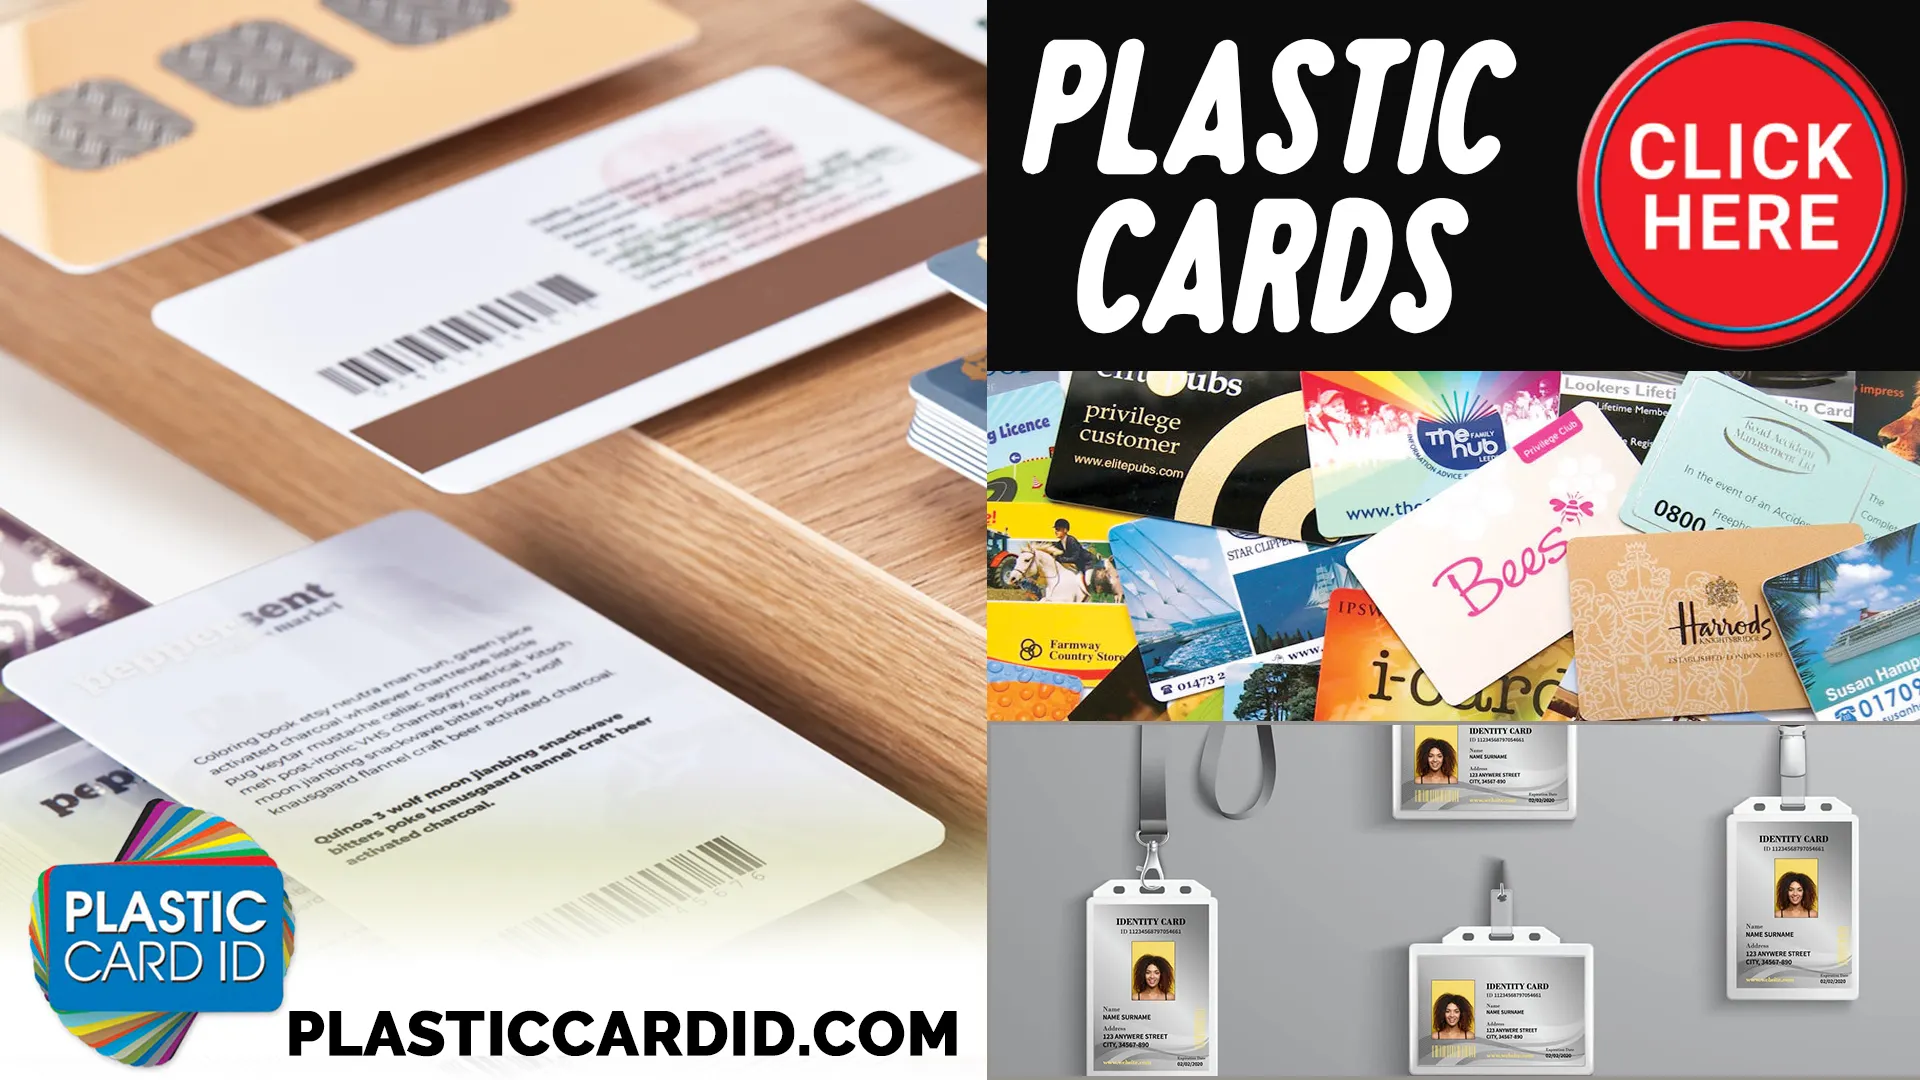 Optimize Your Day with Plastic Card ID
's Smart Solutions